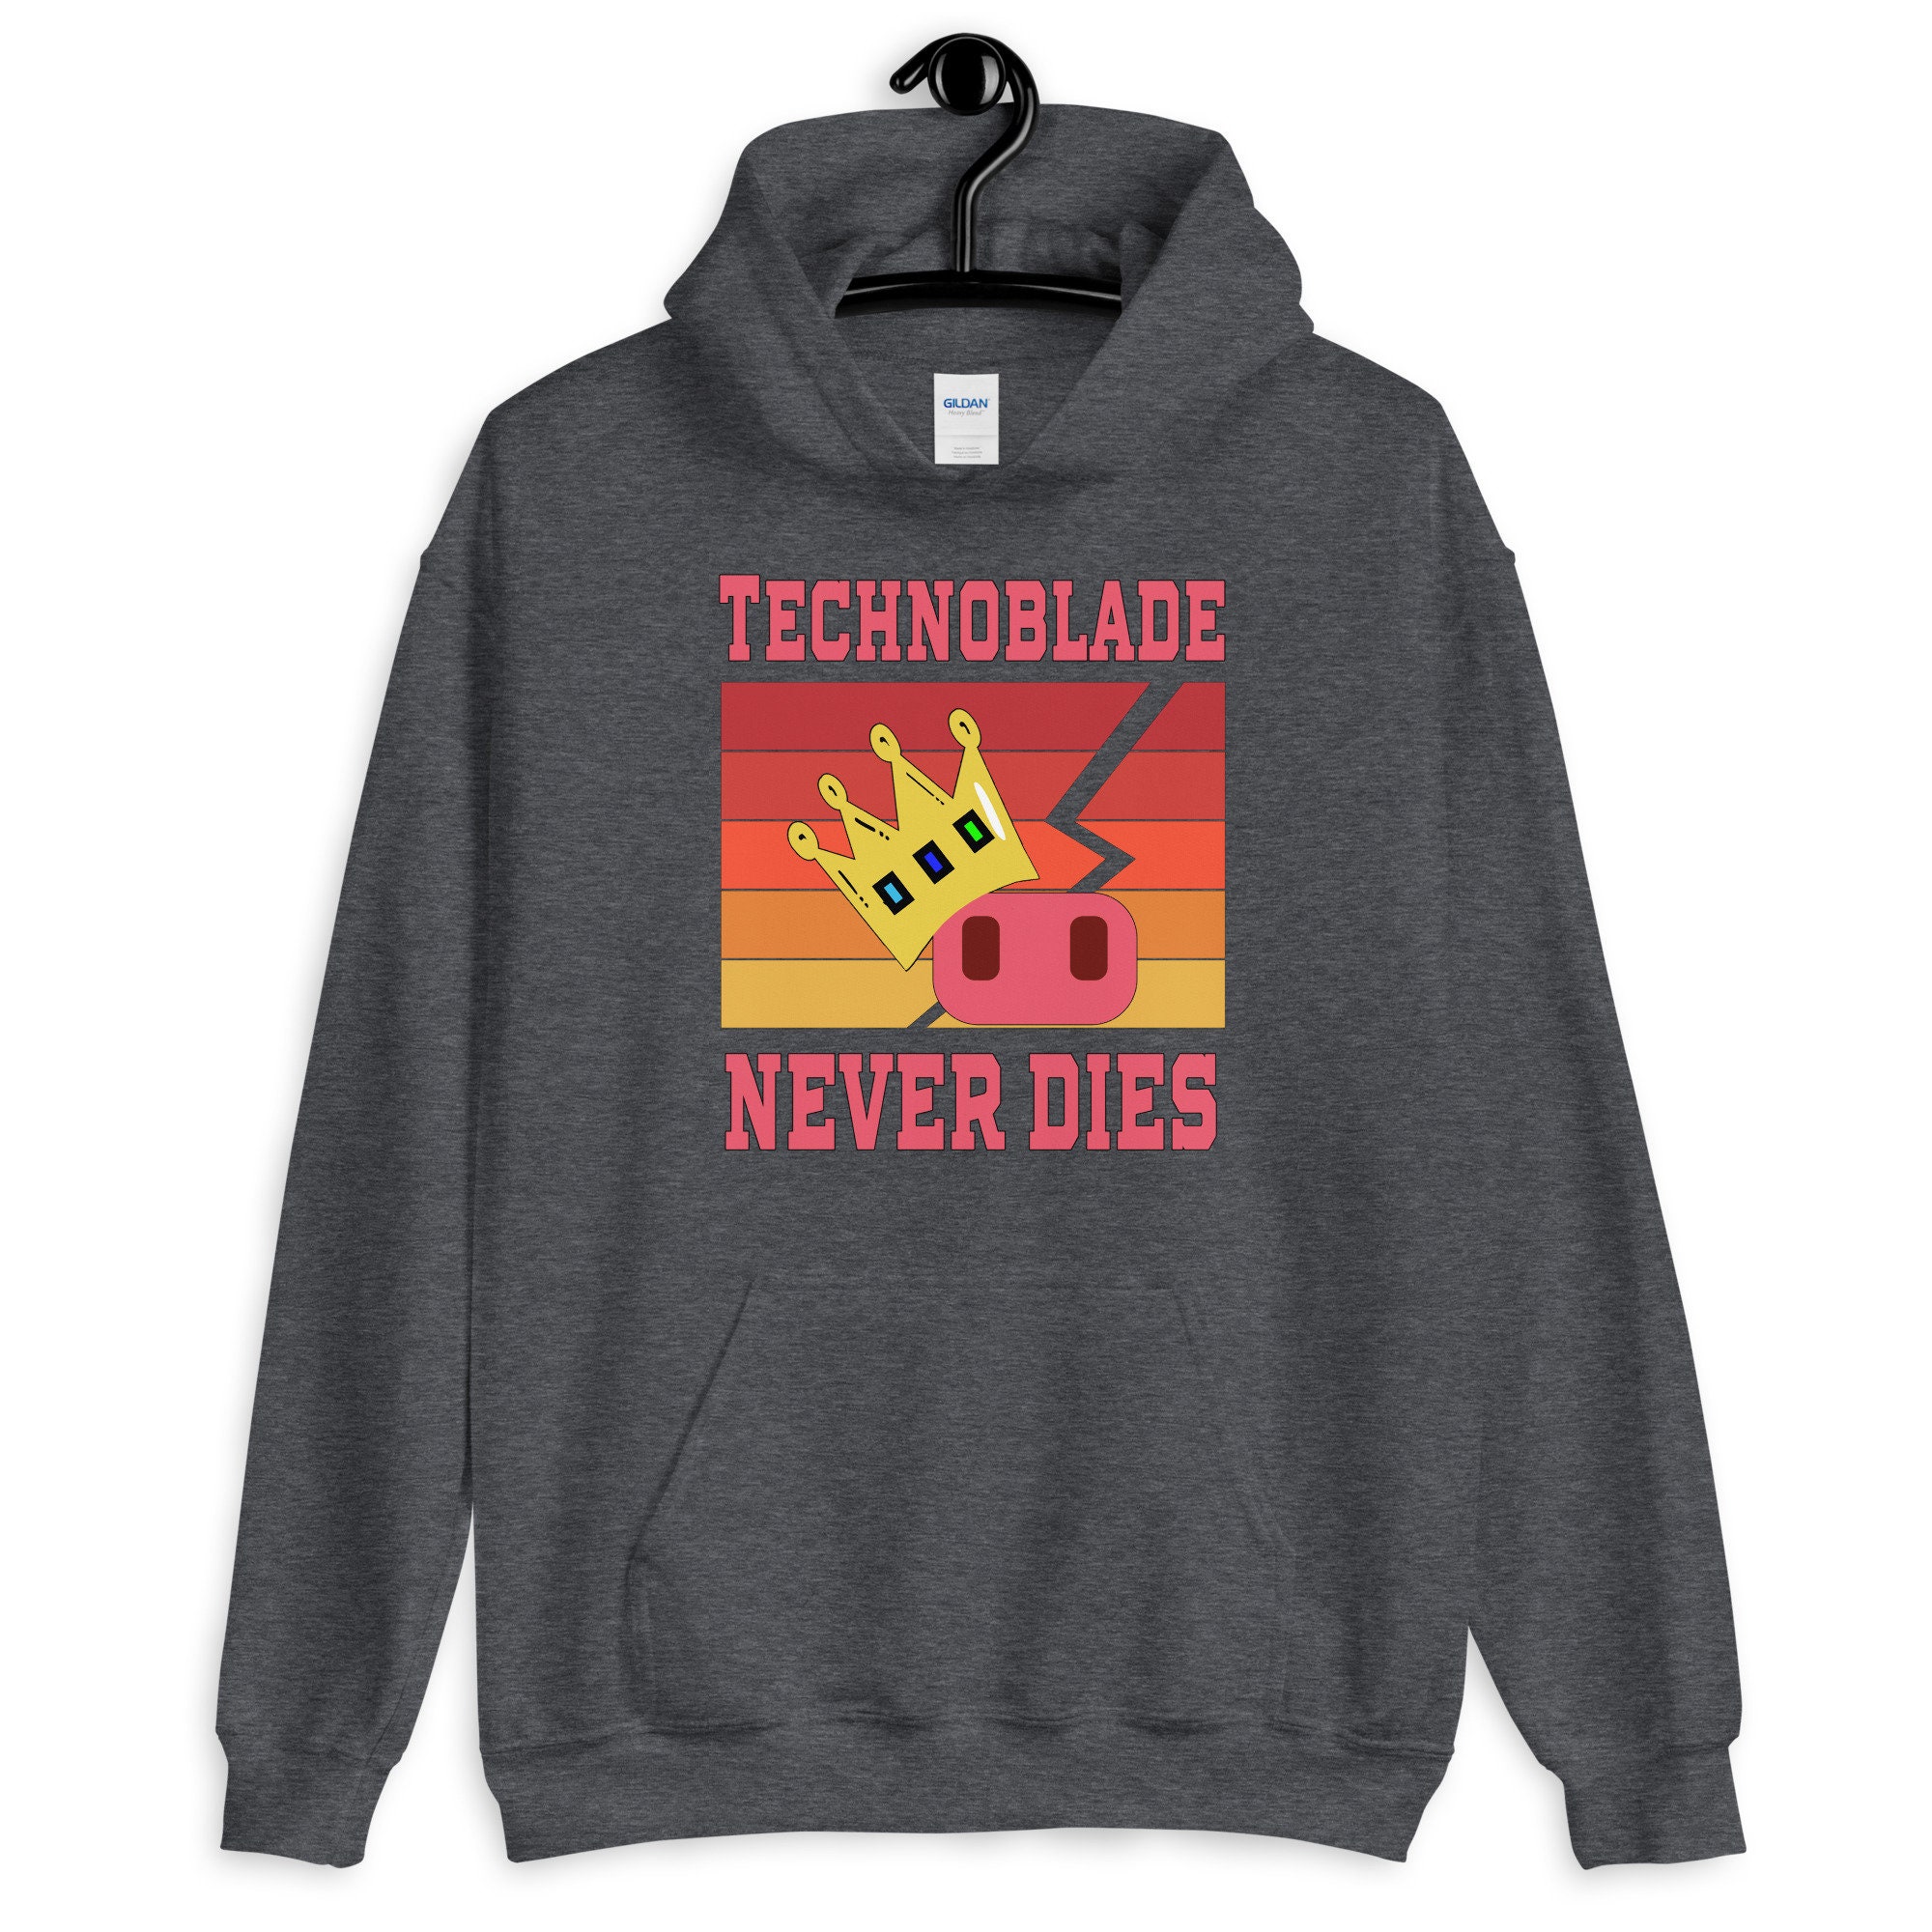 Read TECHNOBLADE NEVER DIES